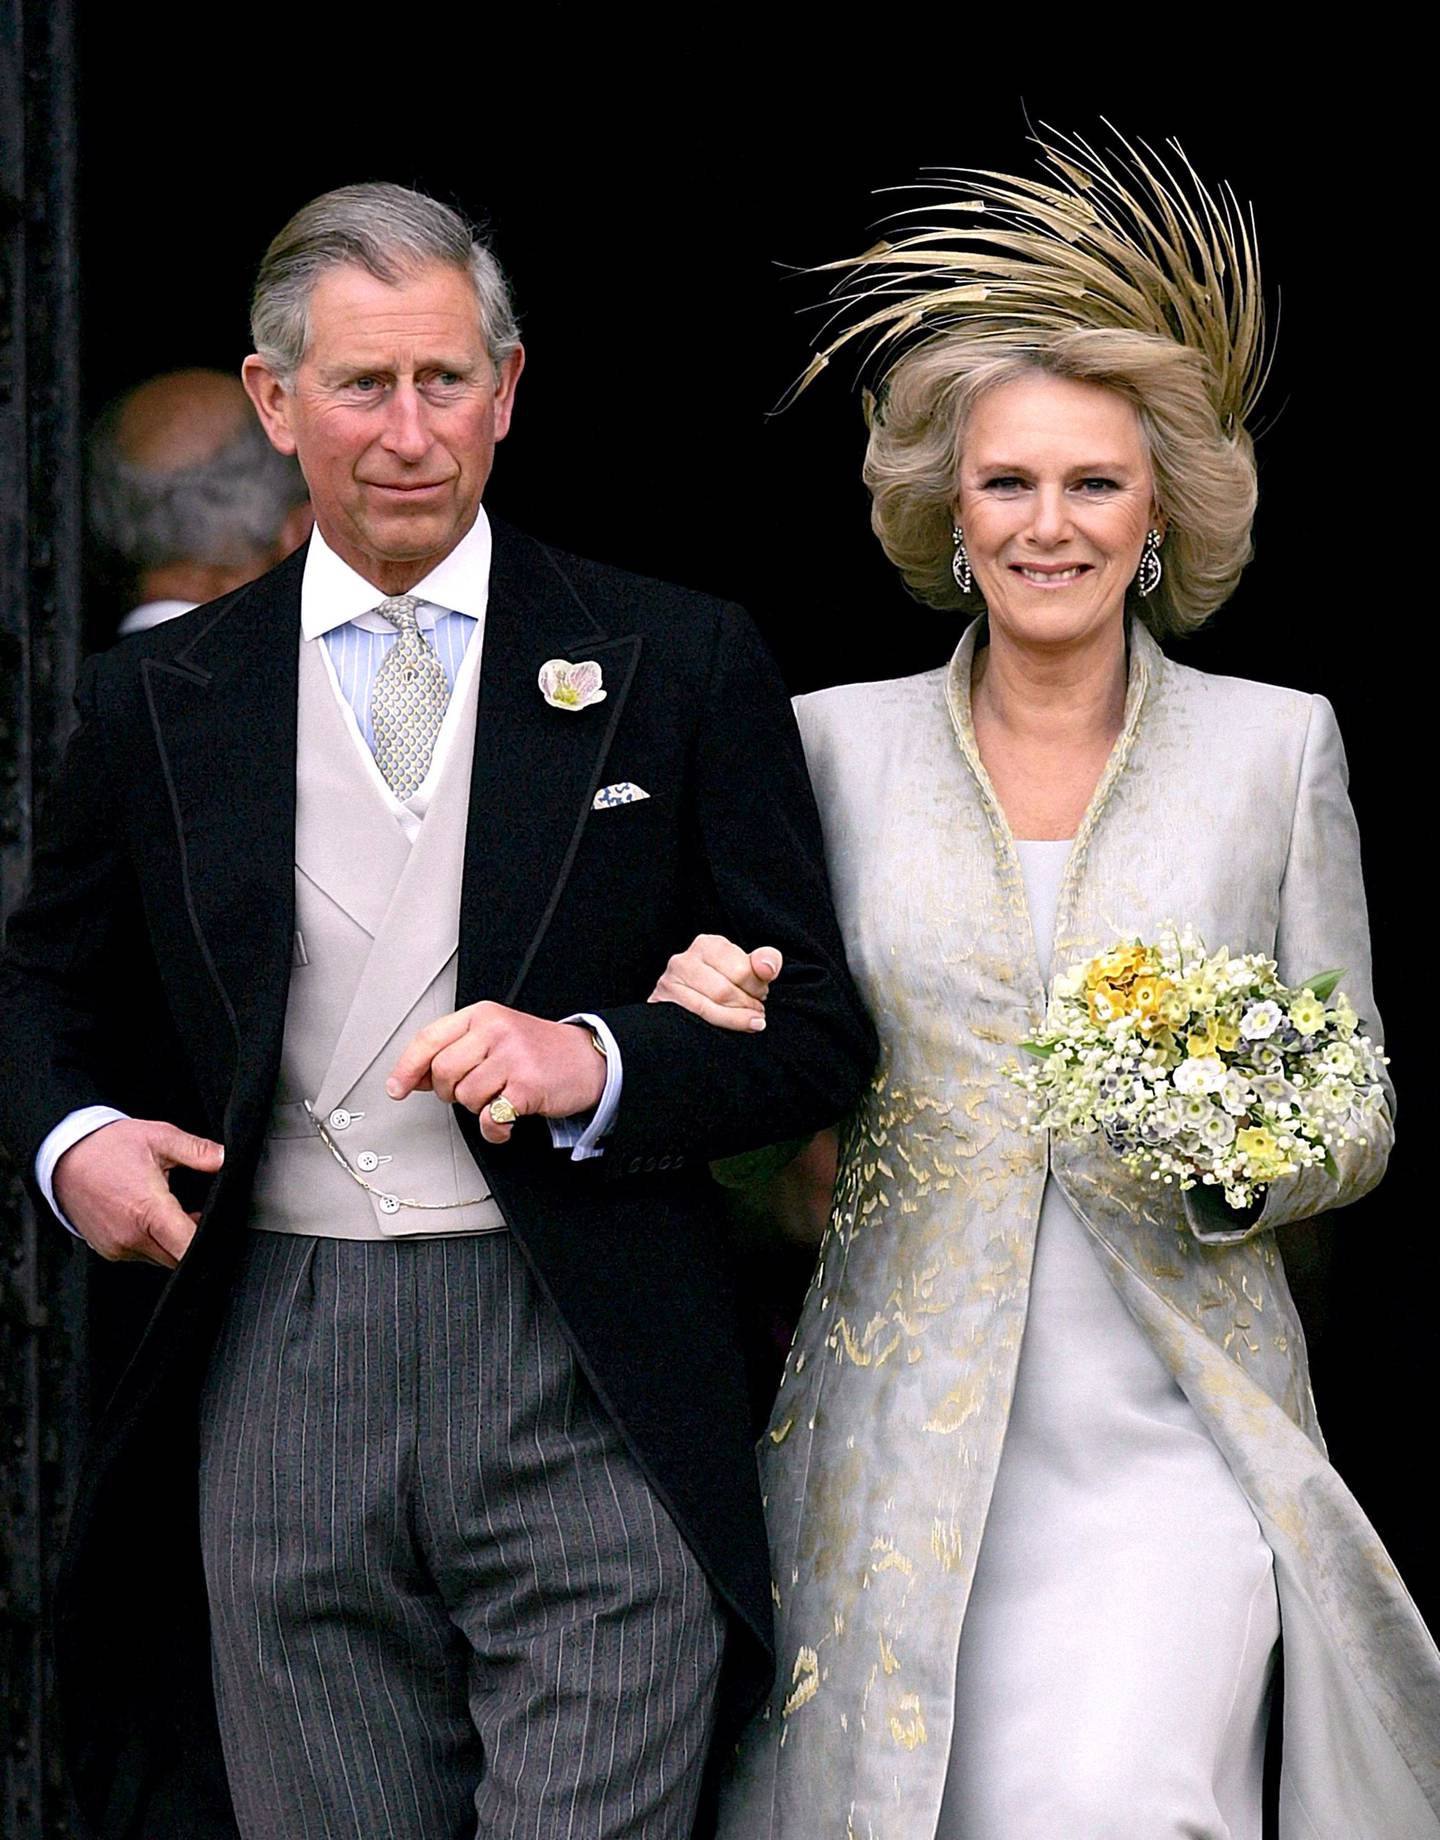 Prince Charles, the Prince of Wales, and Camilla the Duchess of Cornwall, on their wedding day, April 9, 2005. PA 